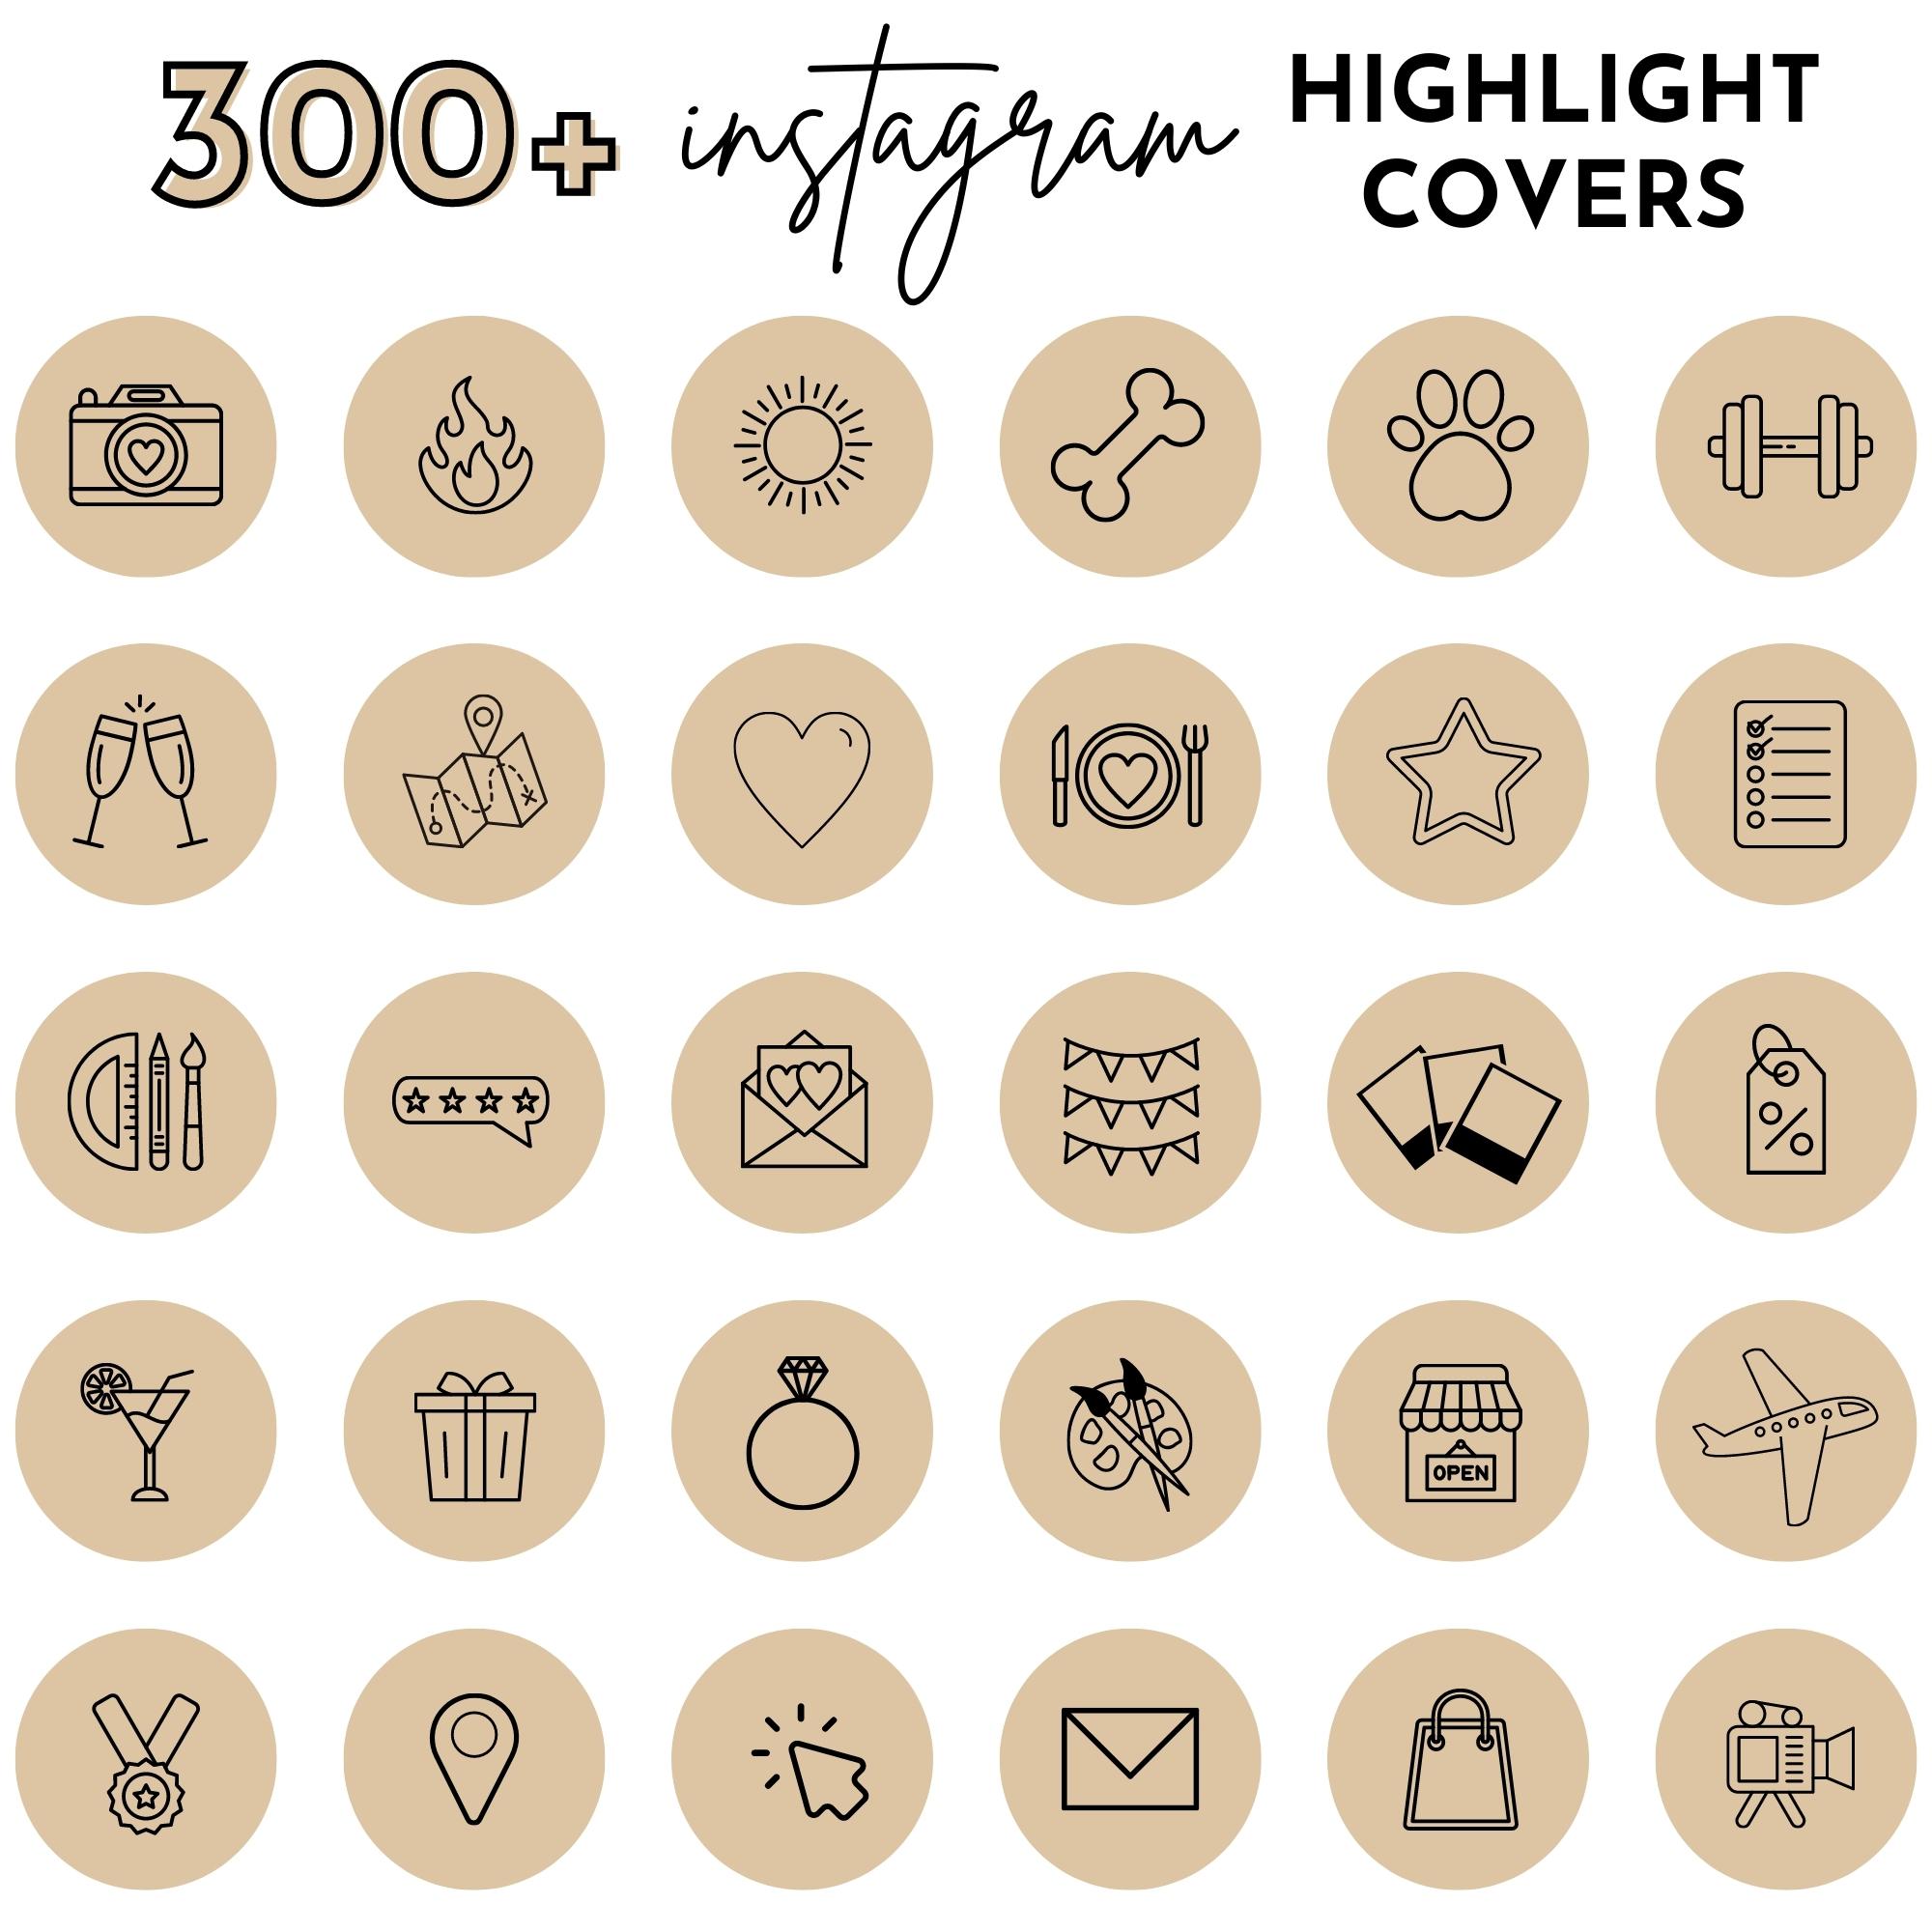 300+ Instagram Highlight Cover Icons - Samantha Creative